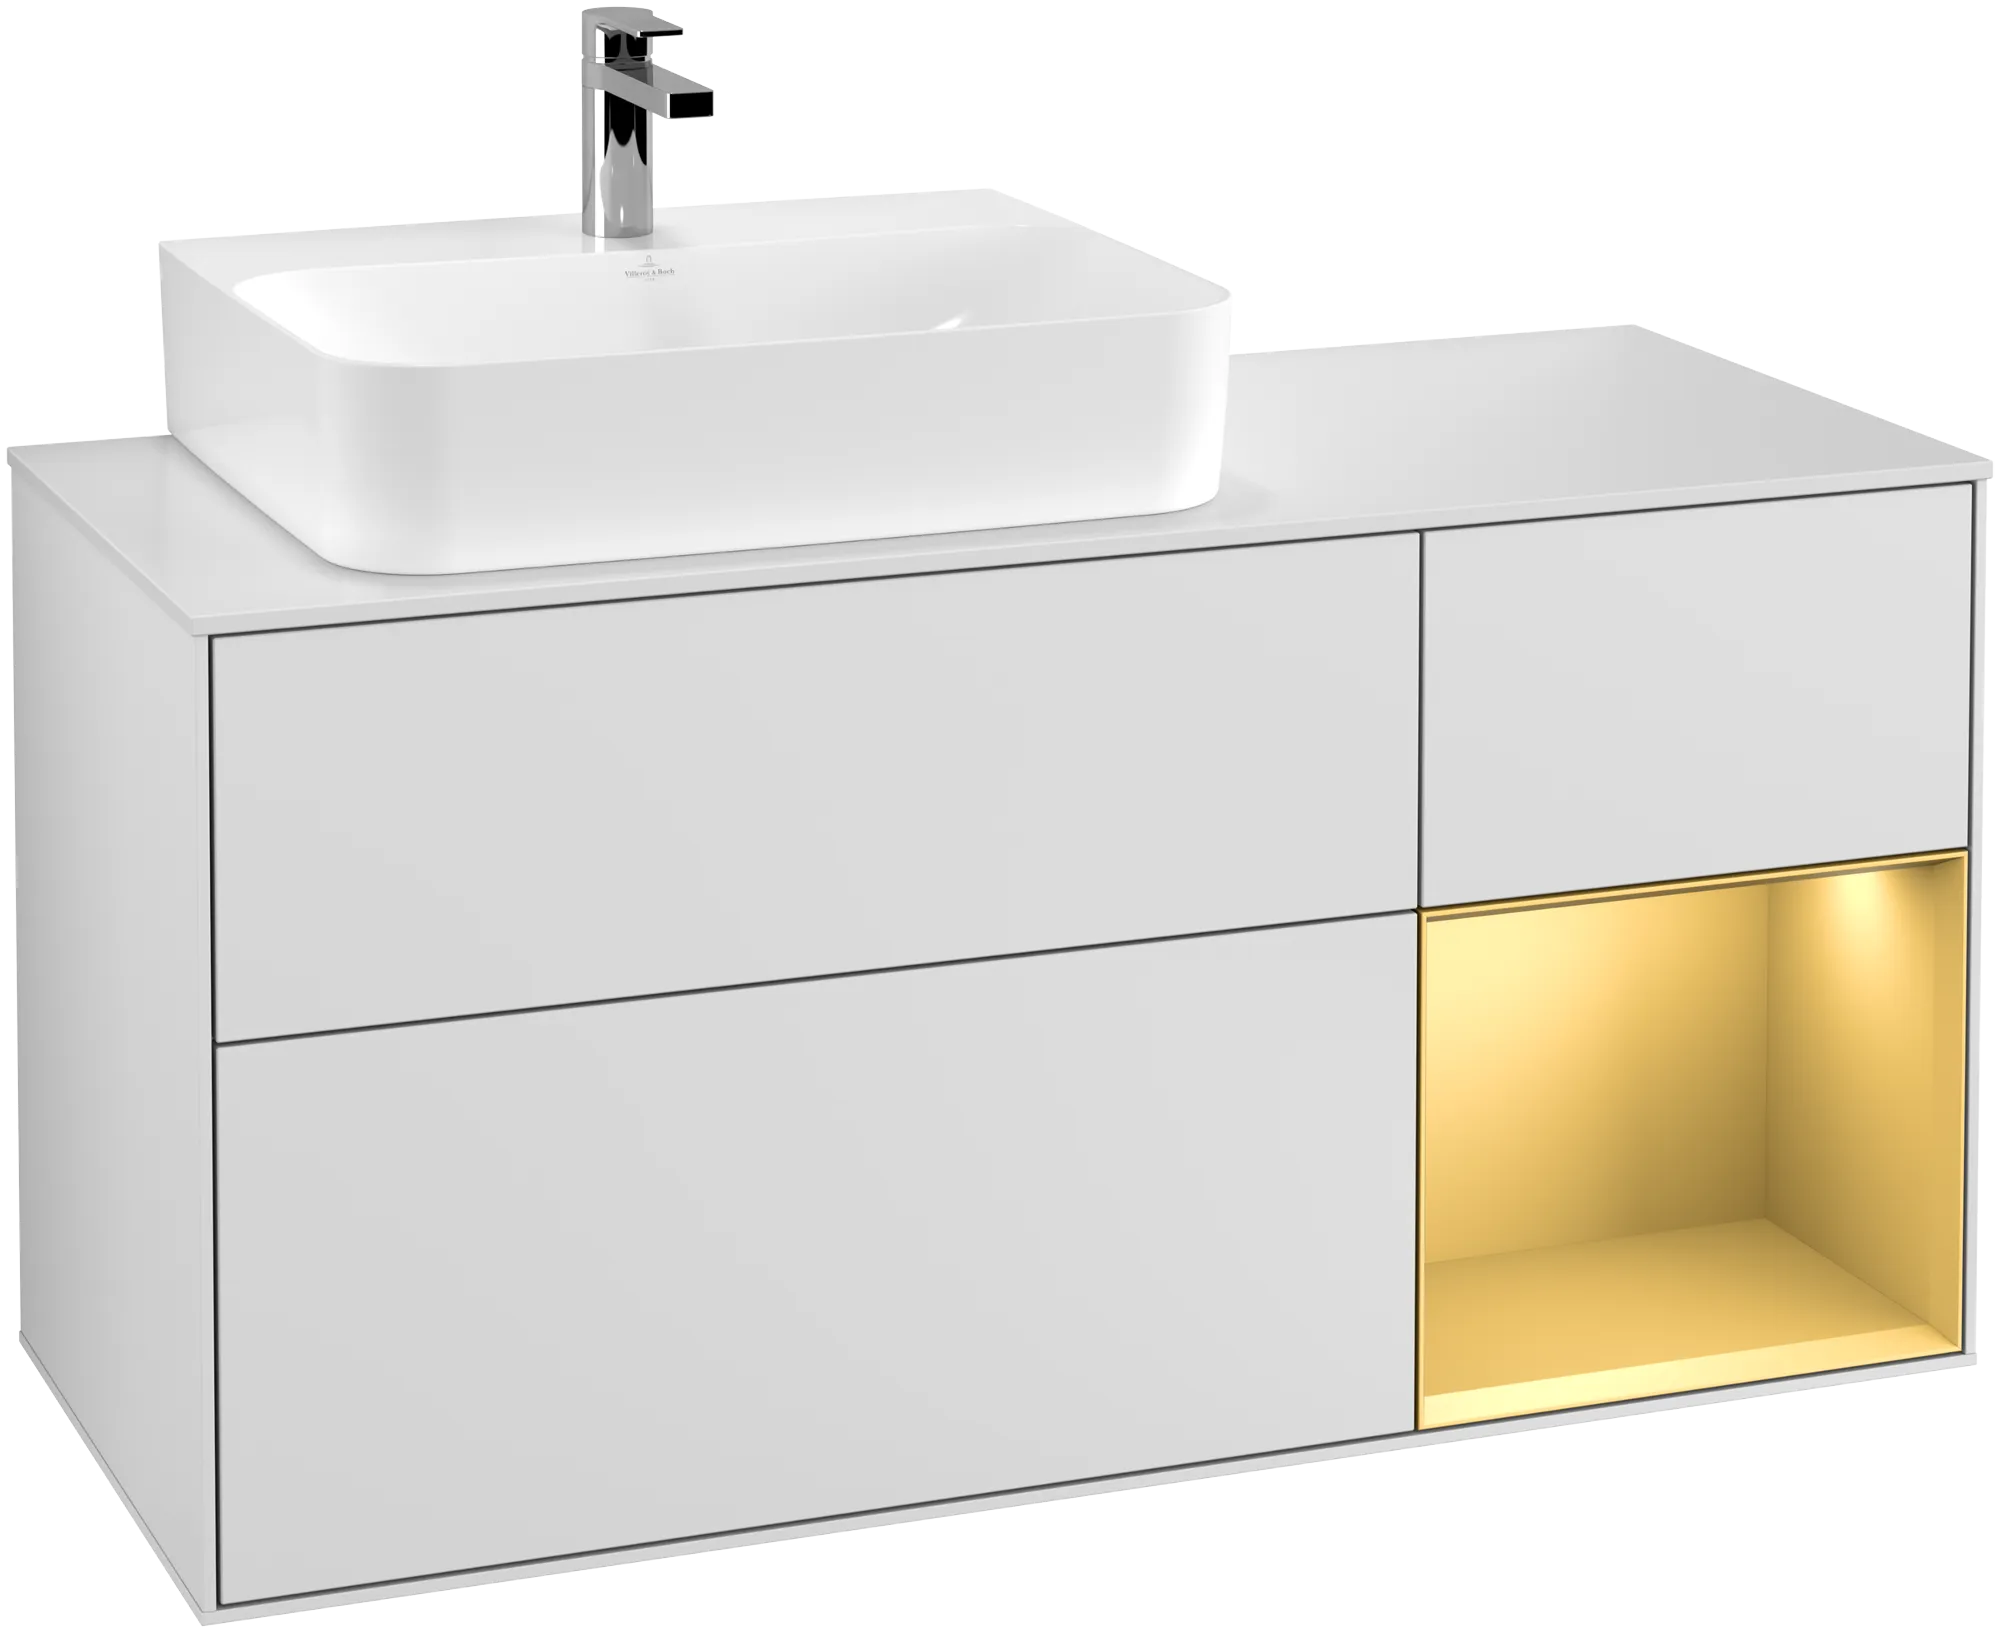 Picture of VILLEROY BOCH Finion Vanity unit, with lighting, 3 pull-out compartments, 1200 x 603 x 501 mm, White Matt Lacquer / Gold Matt Lacquer / Glass White Matt #G151HFMT